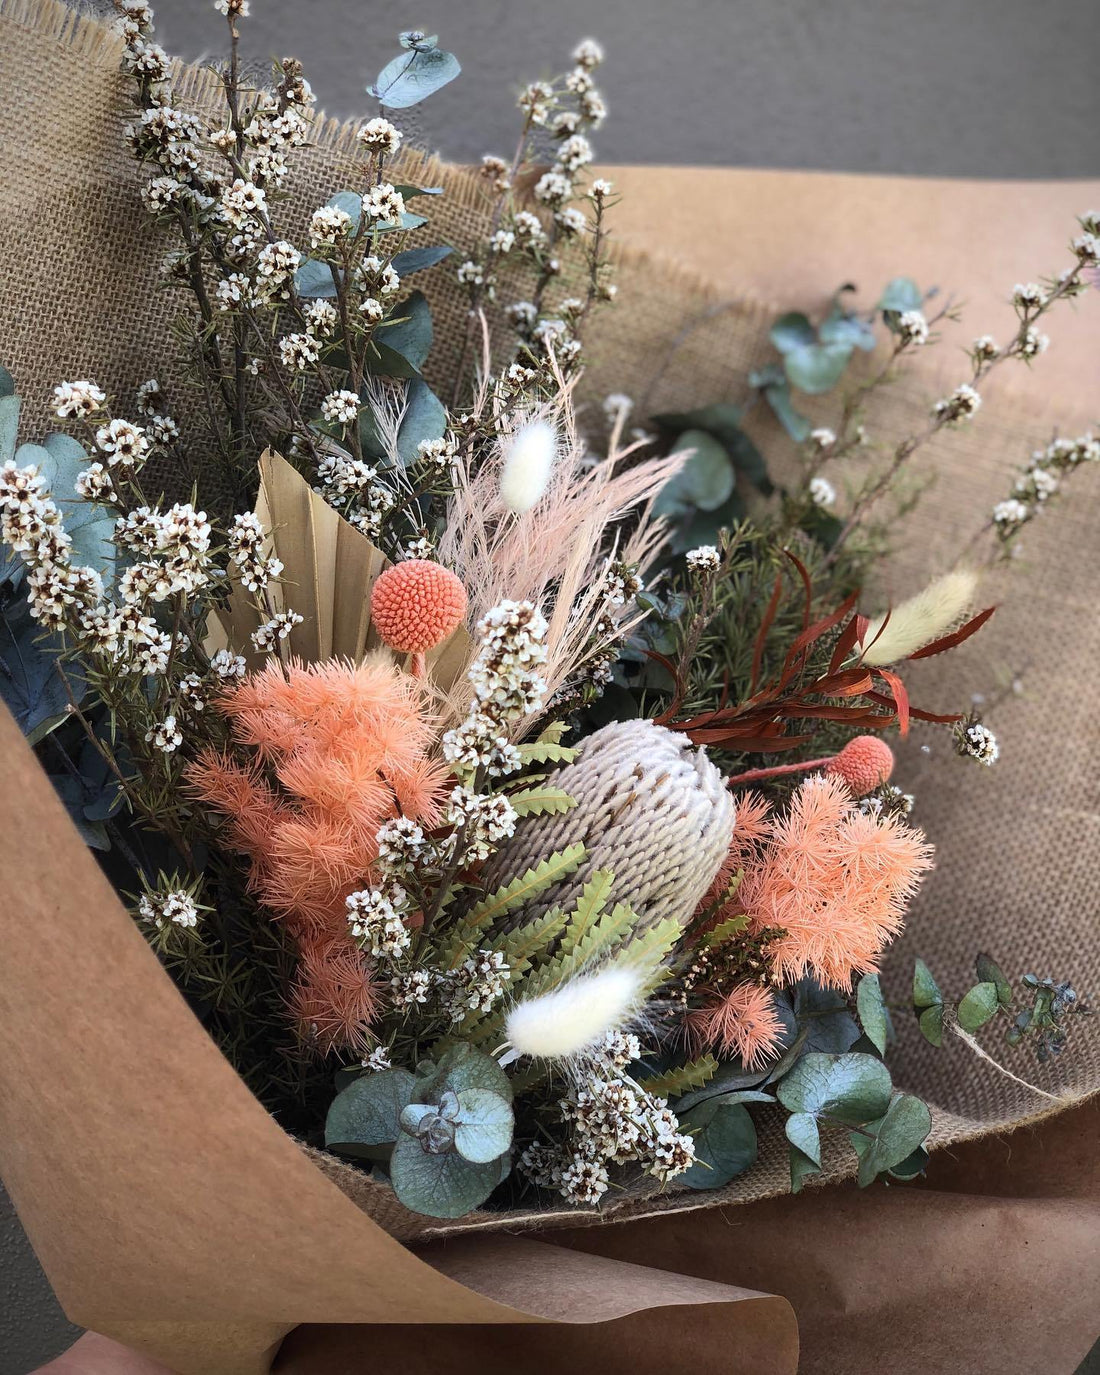 Rustic Charm - An arrangement of dried and preserved flowers. - Flowers Gold Coast